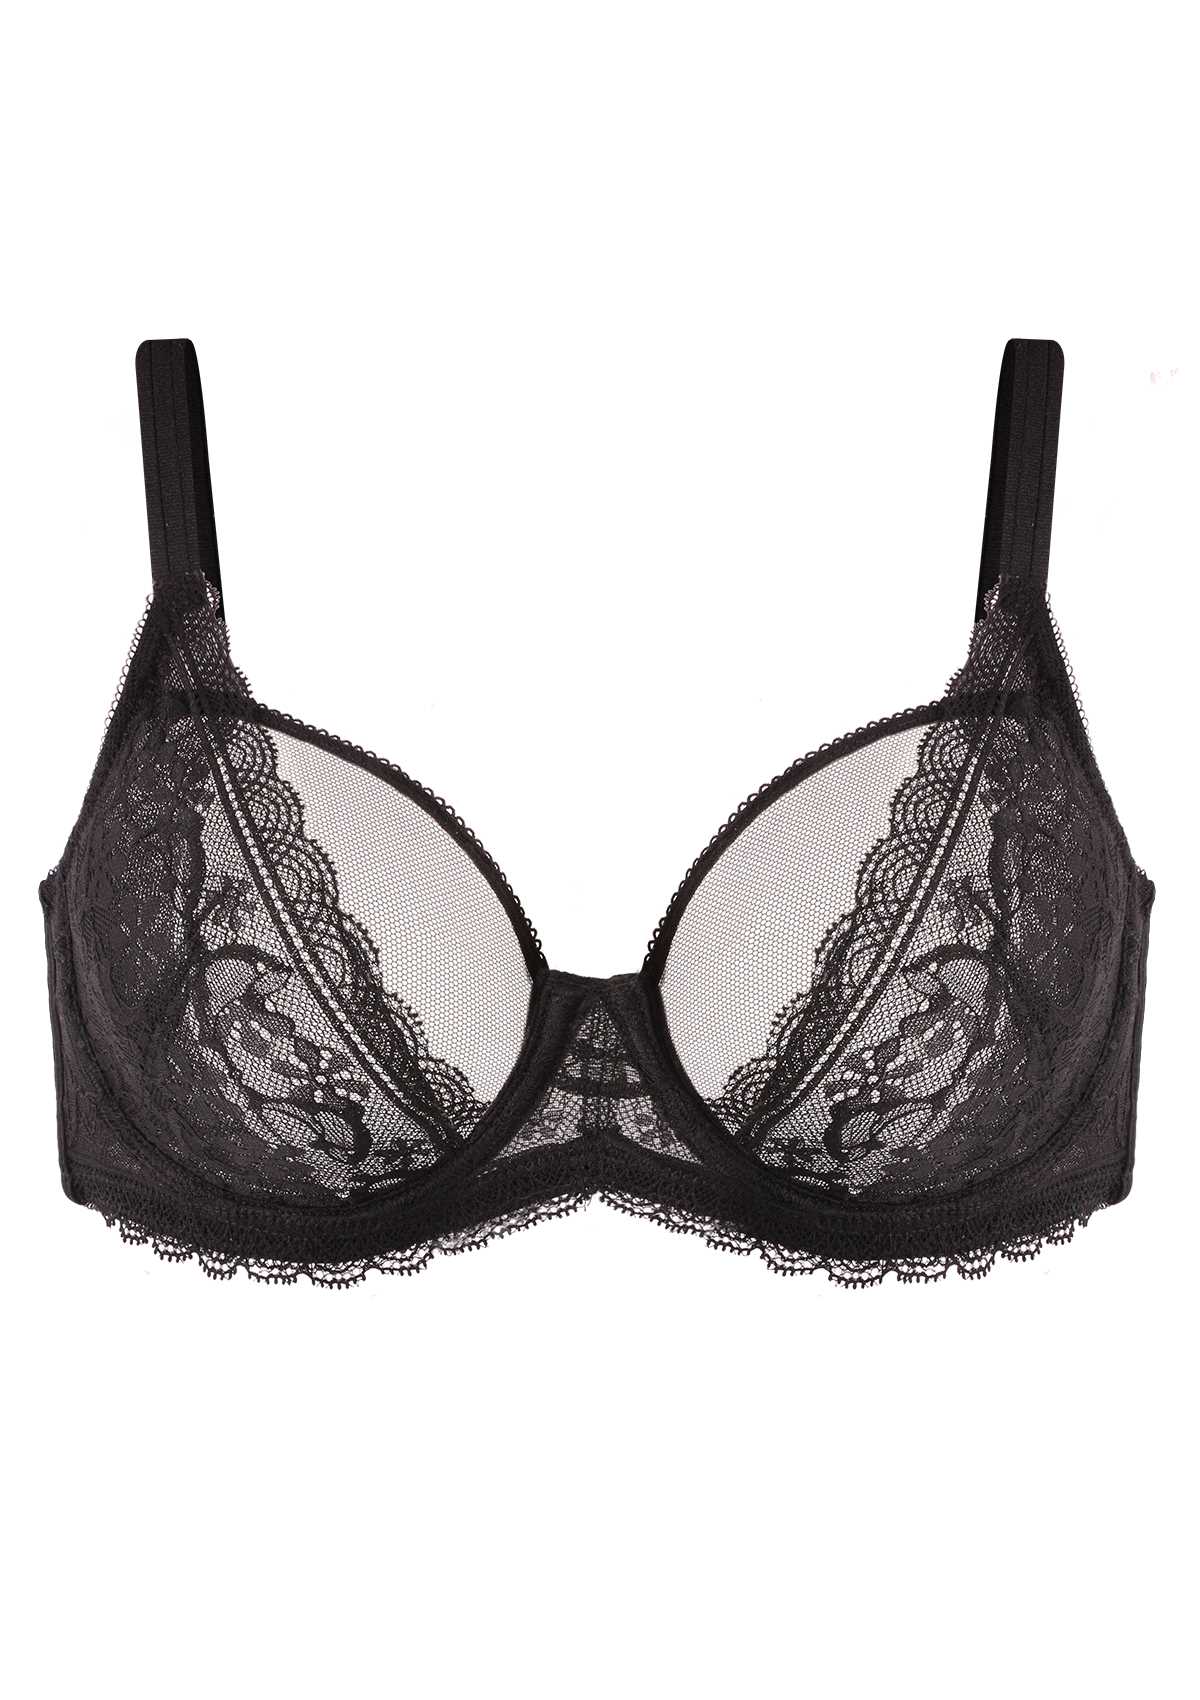 HSIA Anemone Lace Bra And Panties: Back Support Wired Bra - Black / 34 / DDD/F